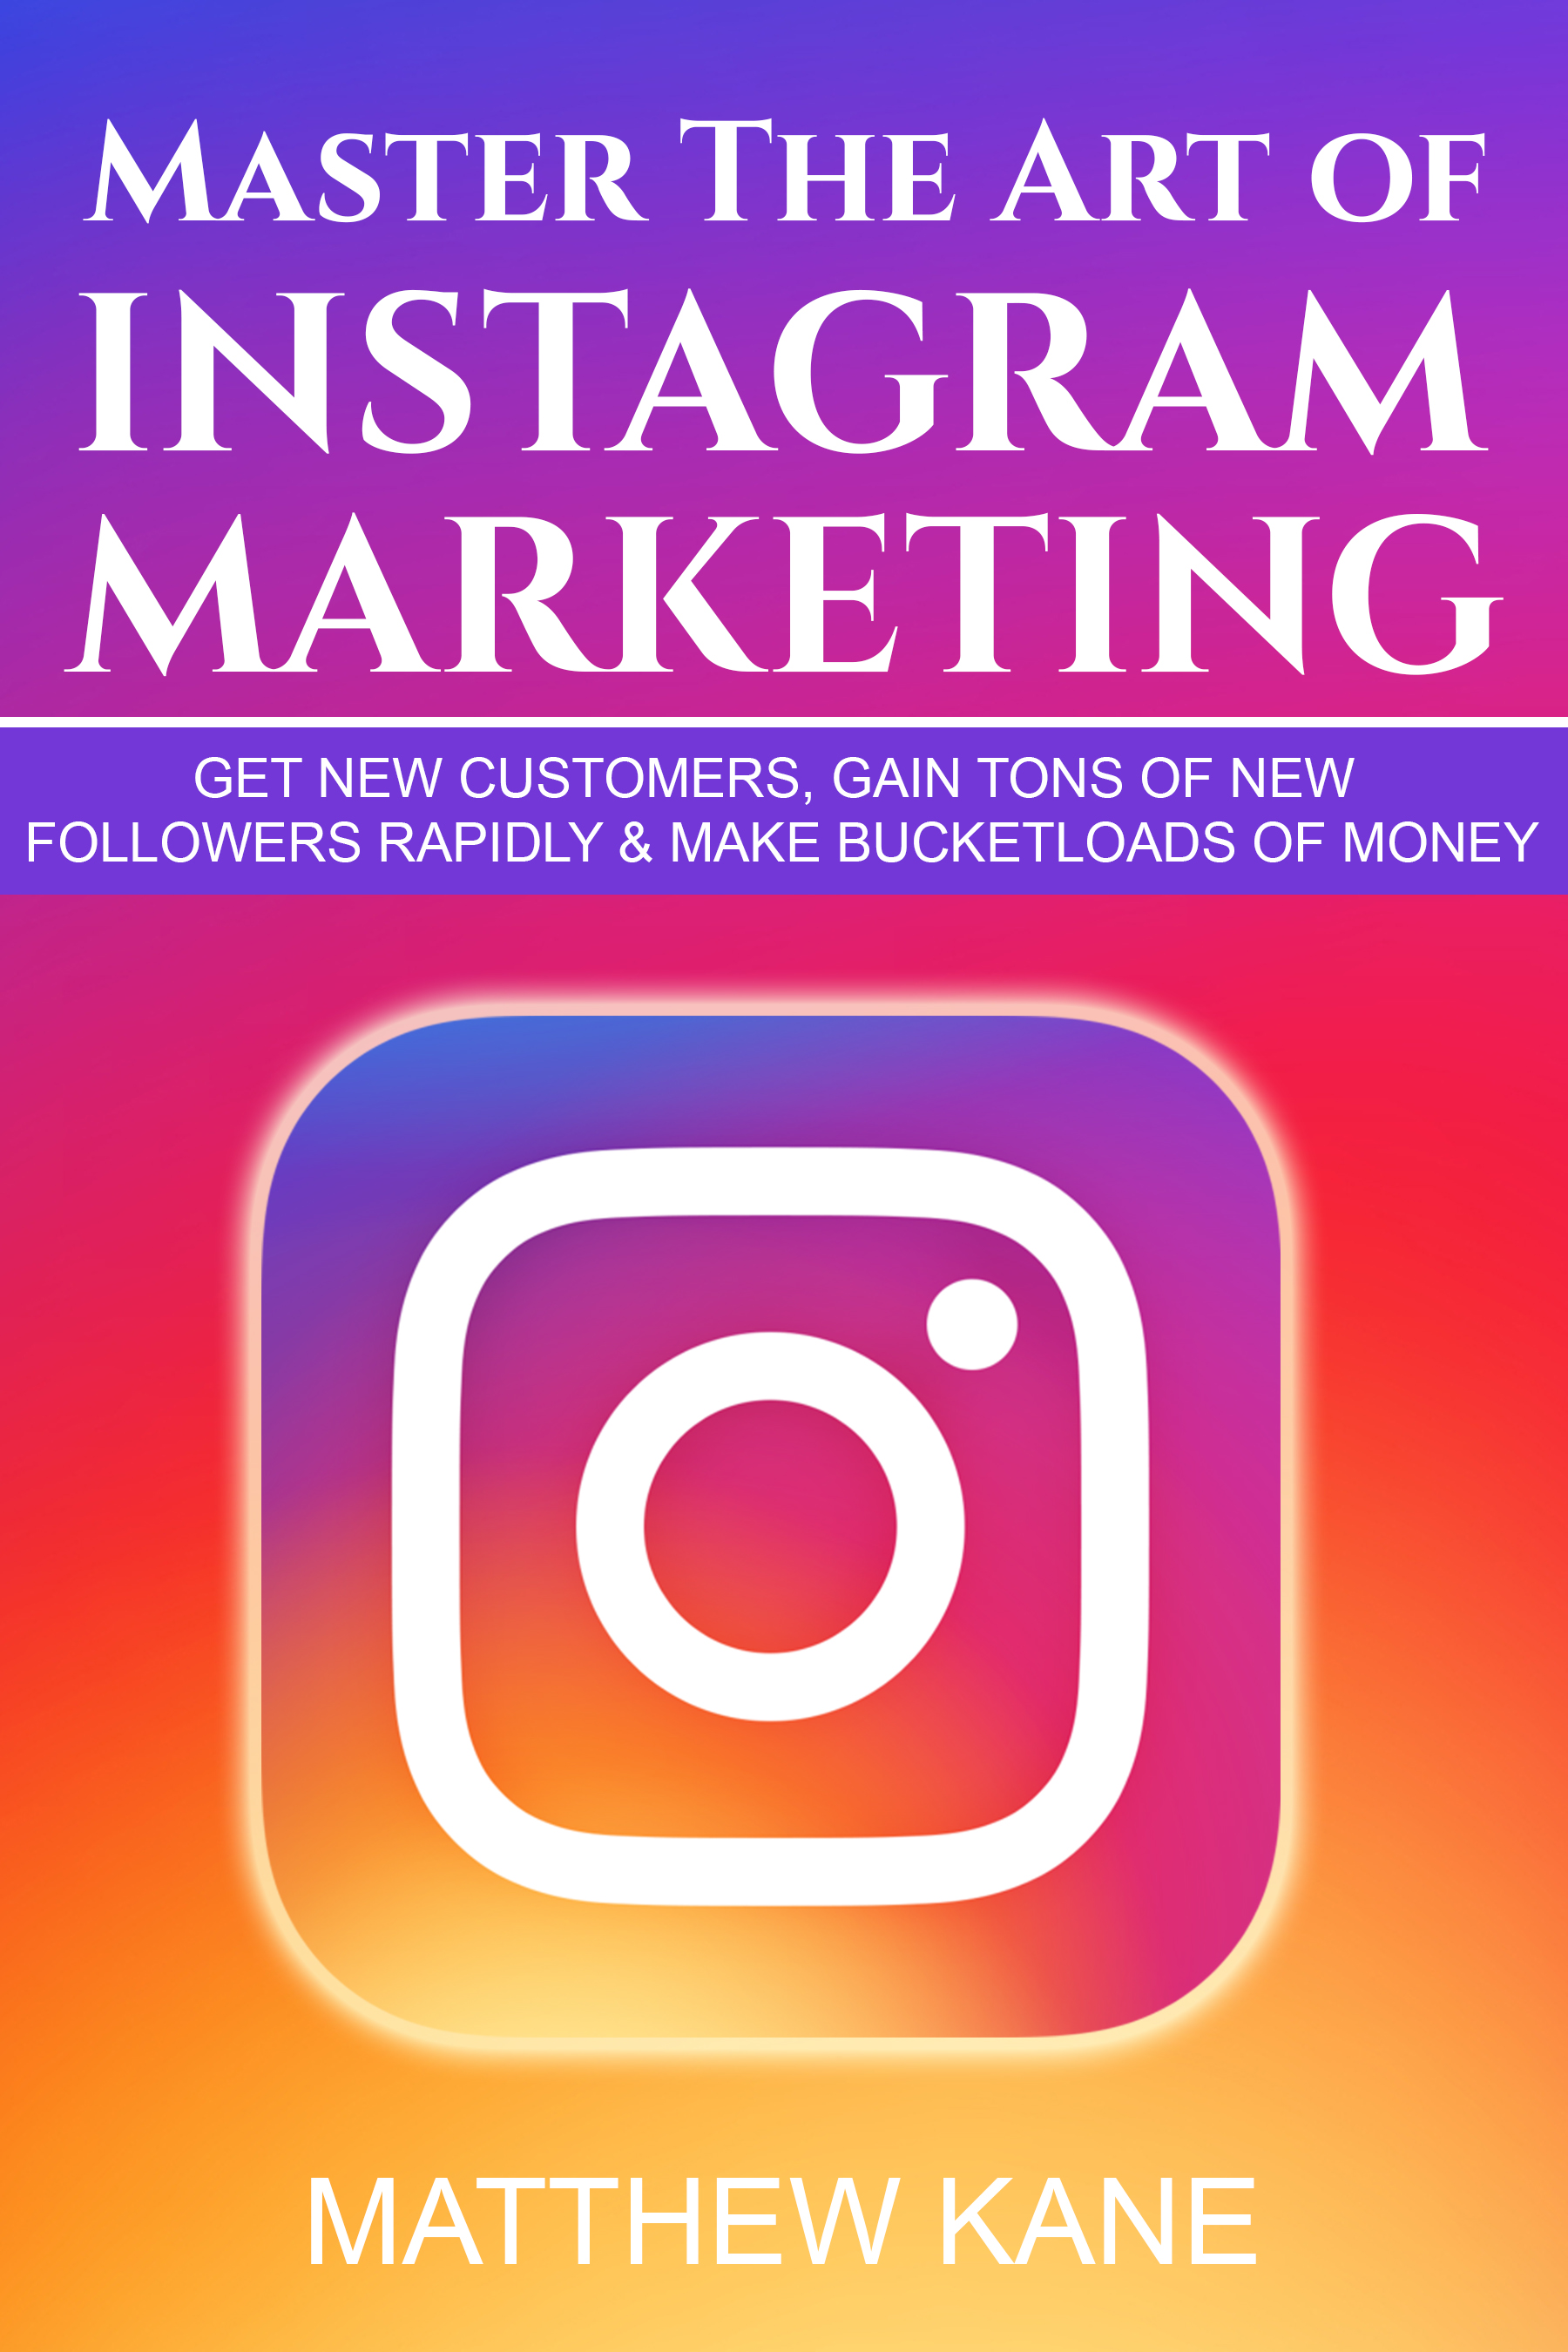 FREE: Master The Art of Instagram Marketing: Get New Customers, Gain Tons of New Followers Rapidly & Make Bucketloads of Money by Matthew Kane